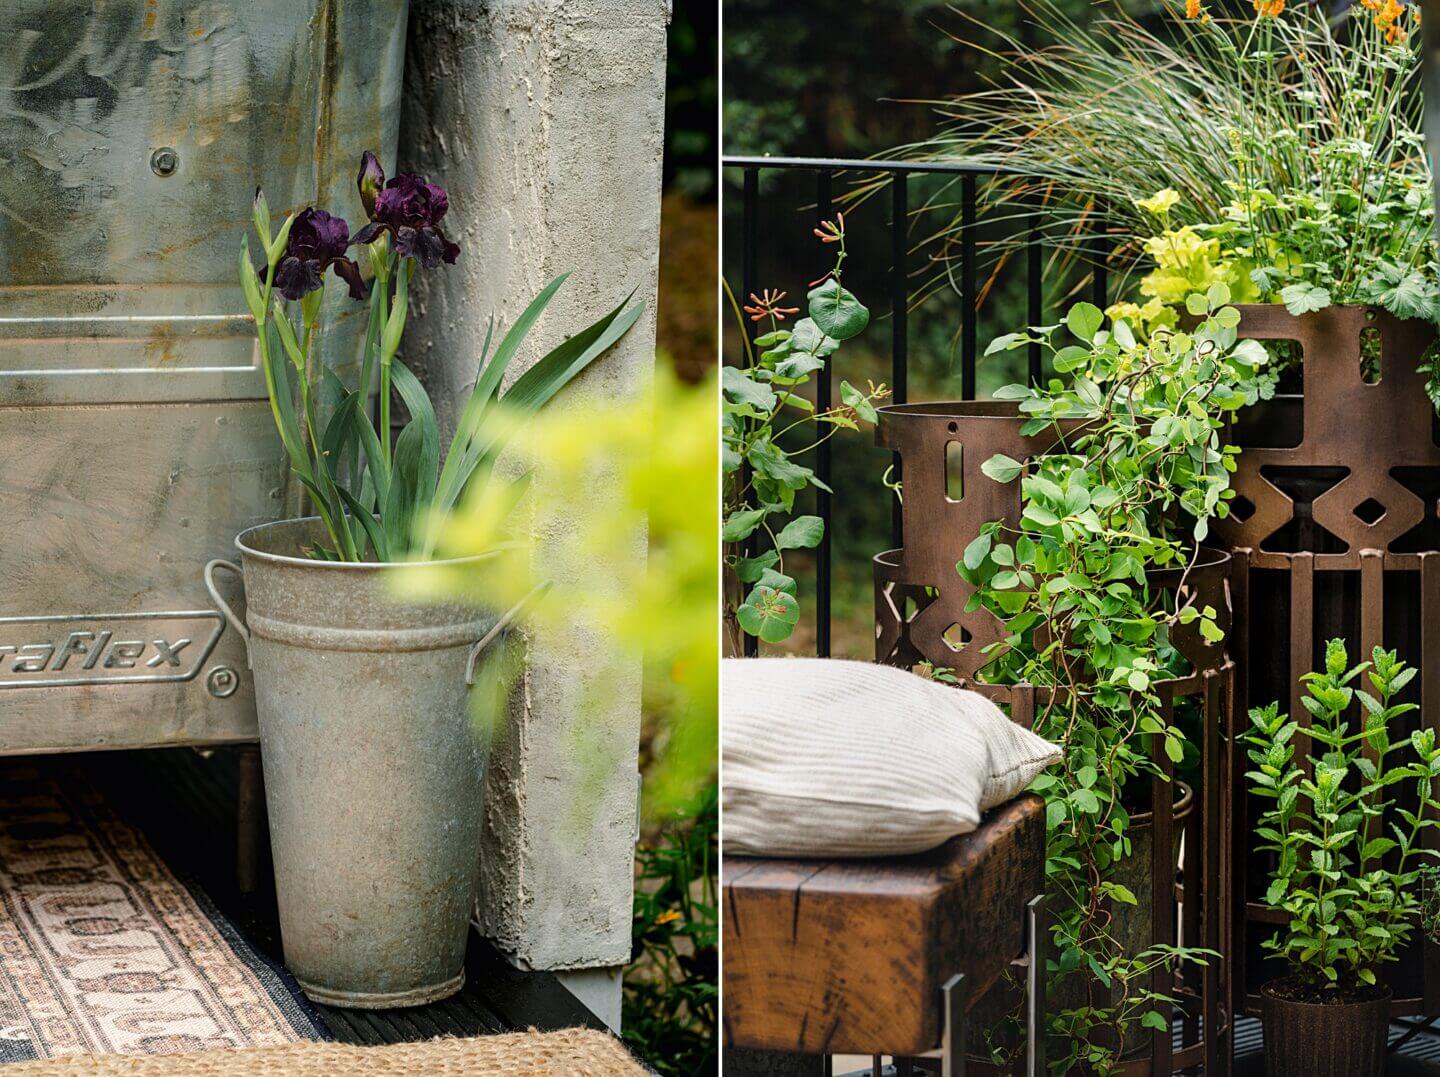 Details of Alight Here balcony garden with repurposed container planting